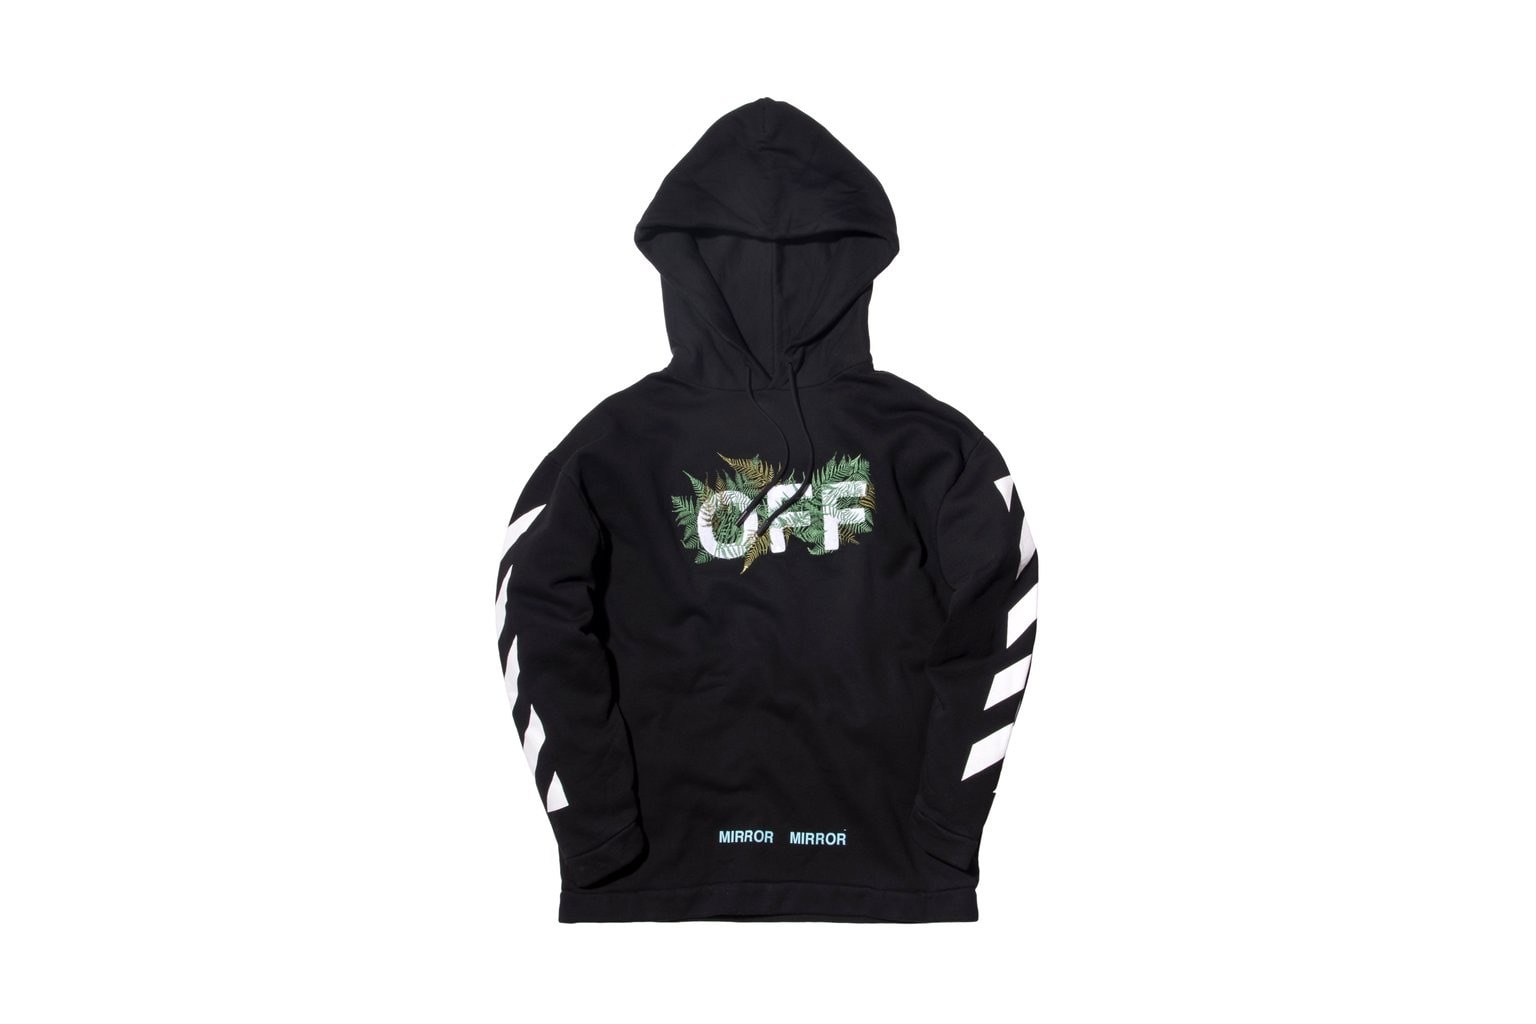 OFF-WHITE 2017 Spring Collection Third Drop